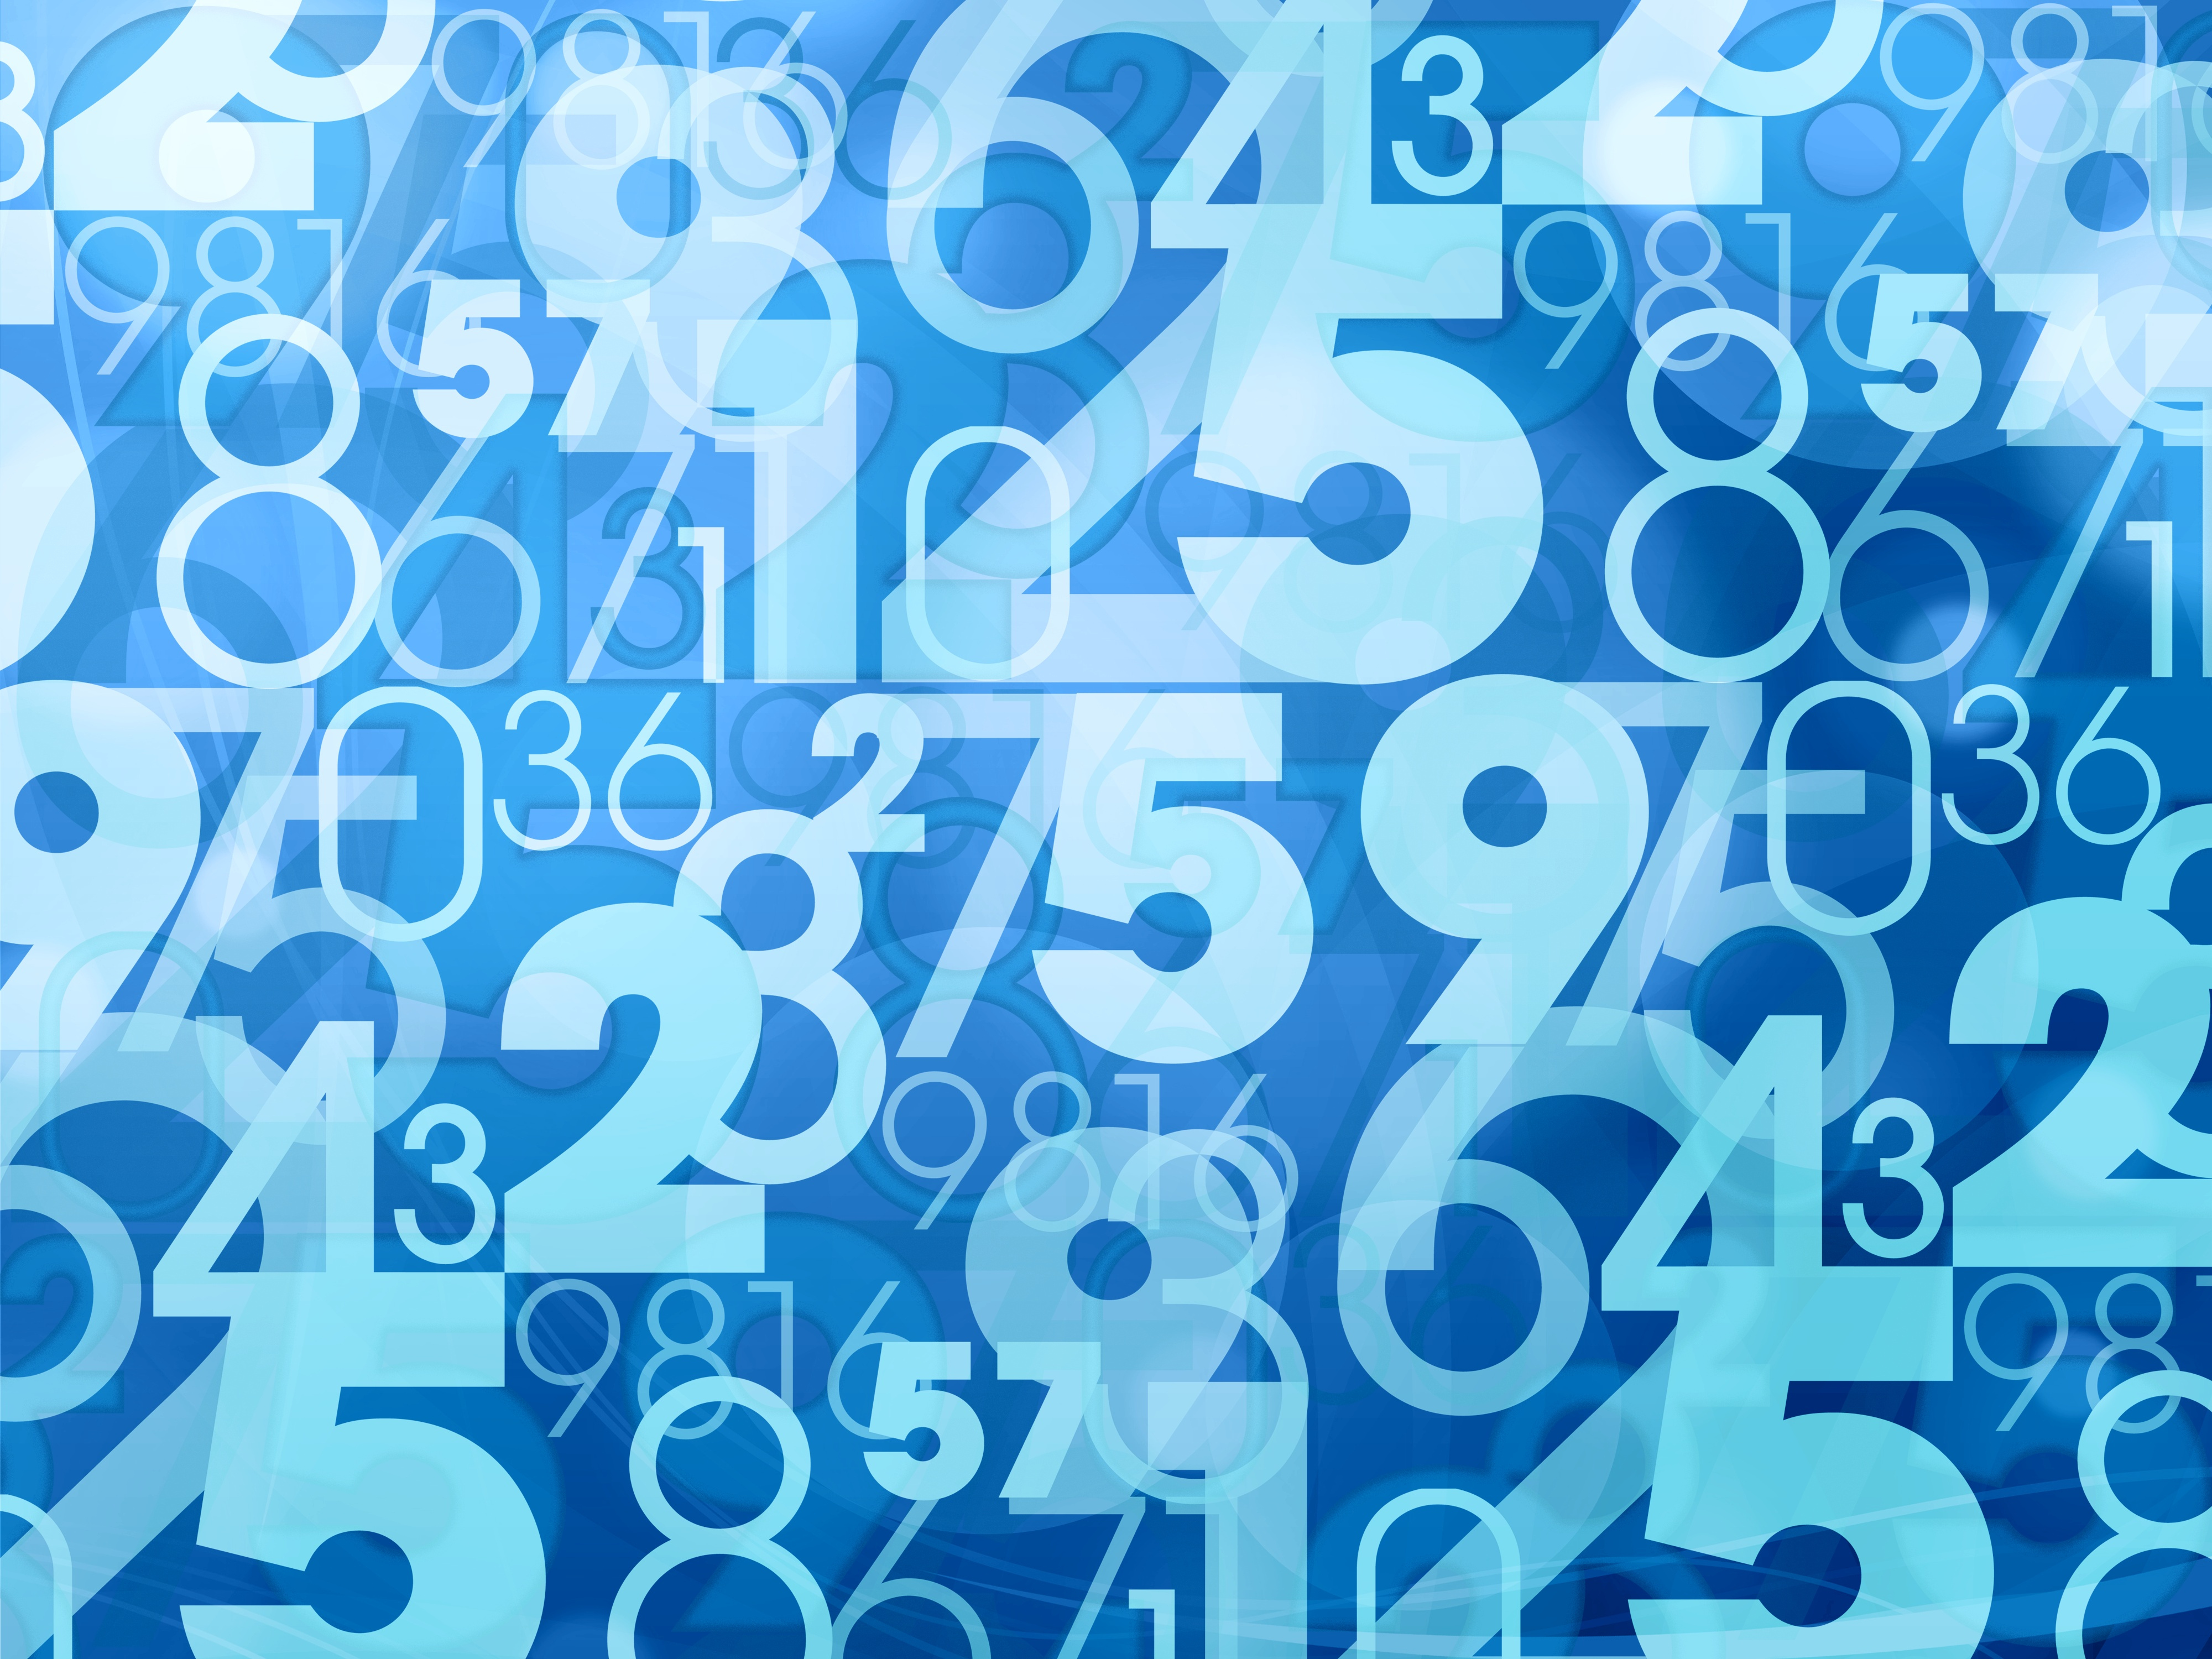 Decorative image of jumbled numbers on a blue background